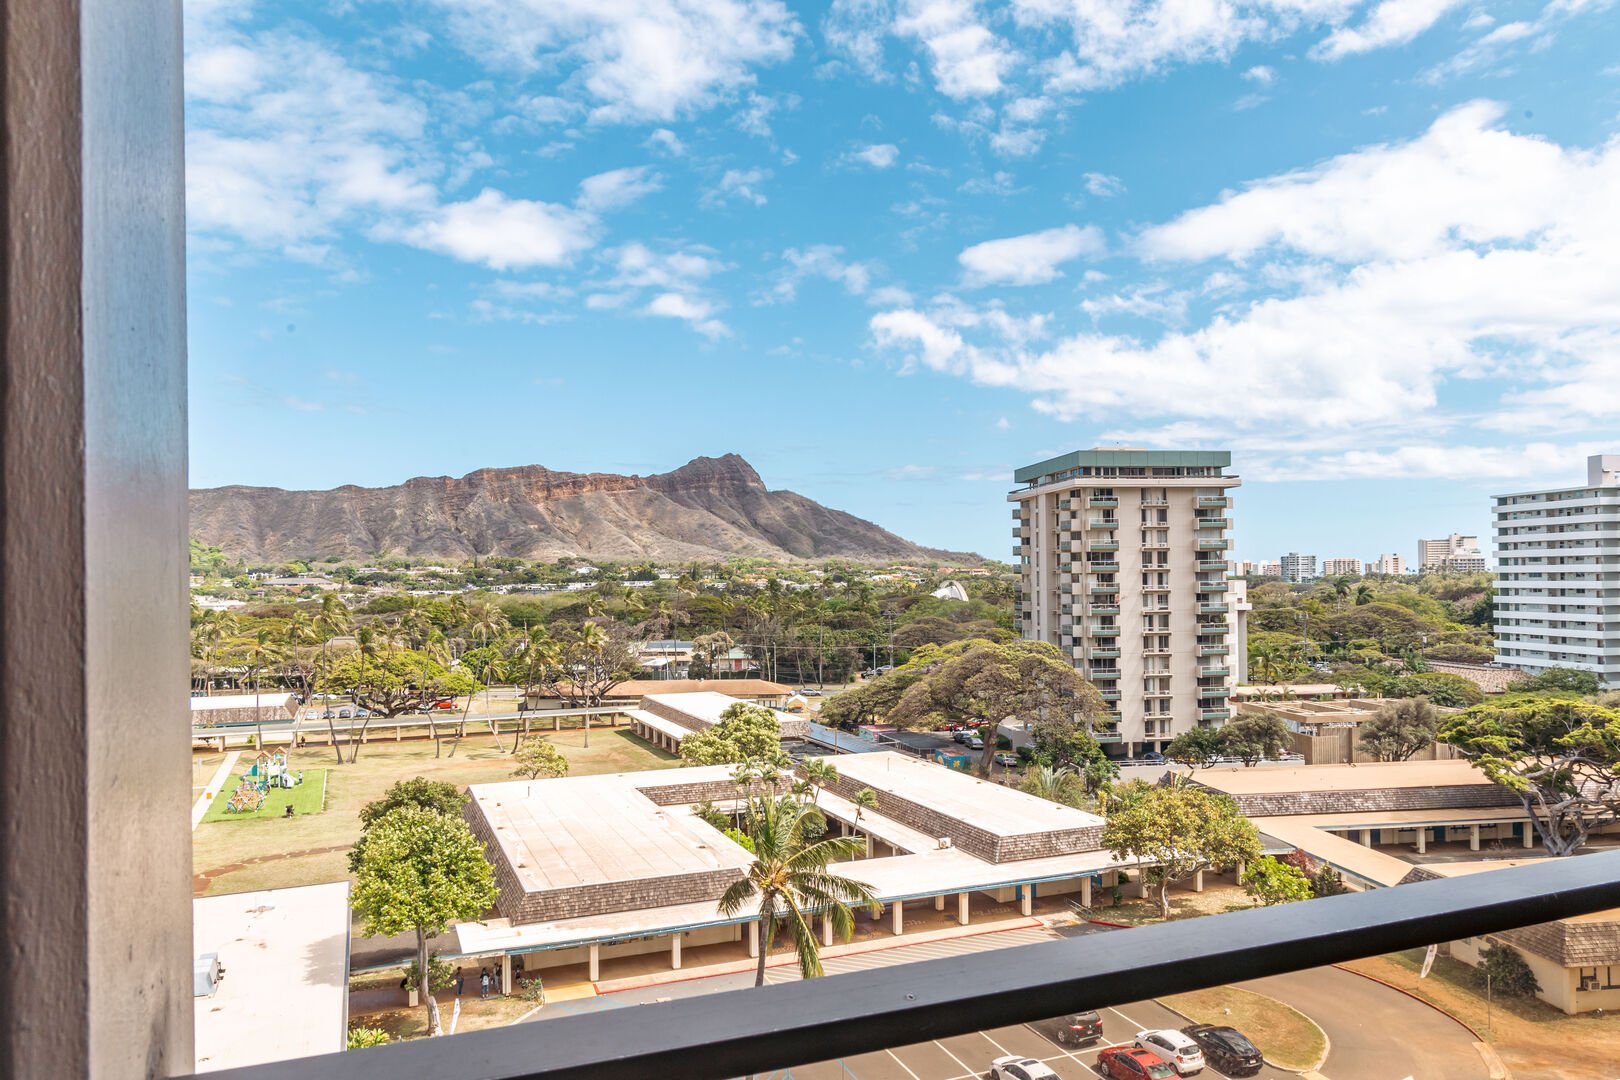 Stunning diamond head view from your balcony.